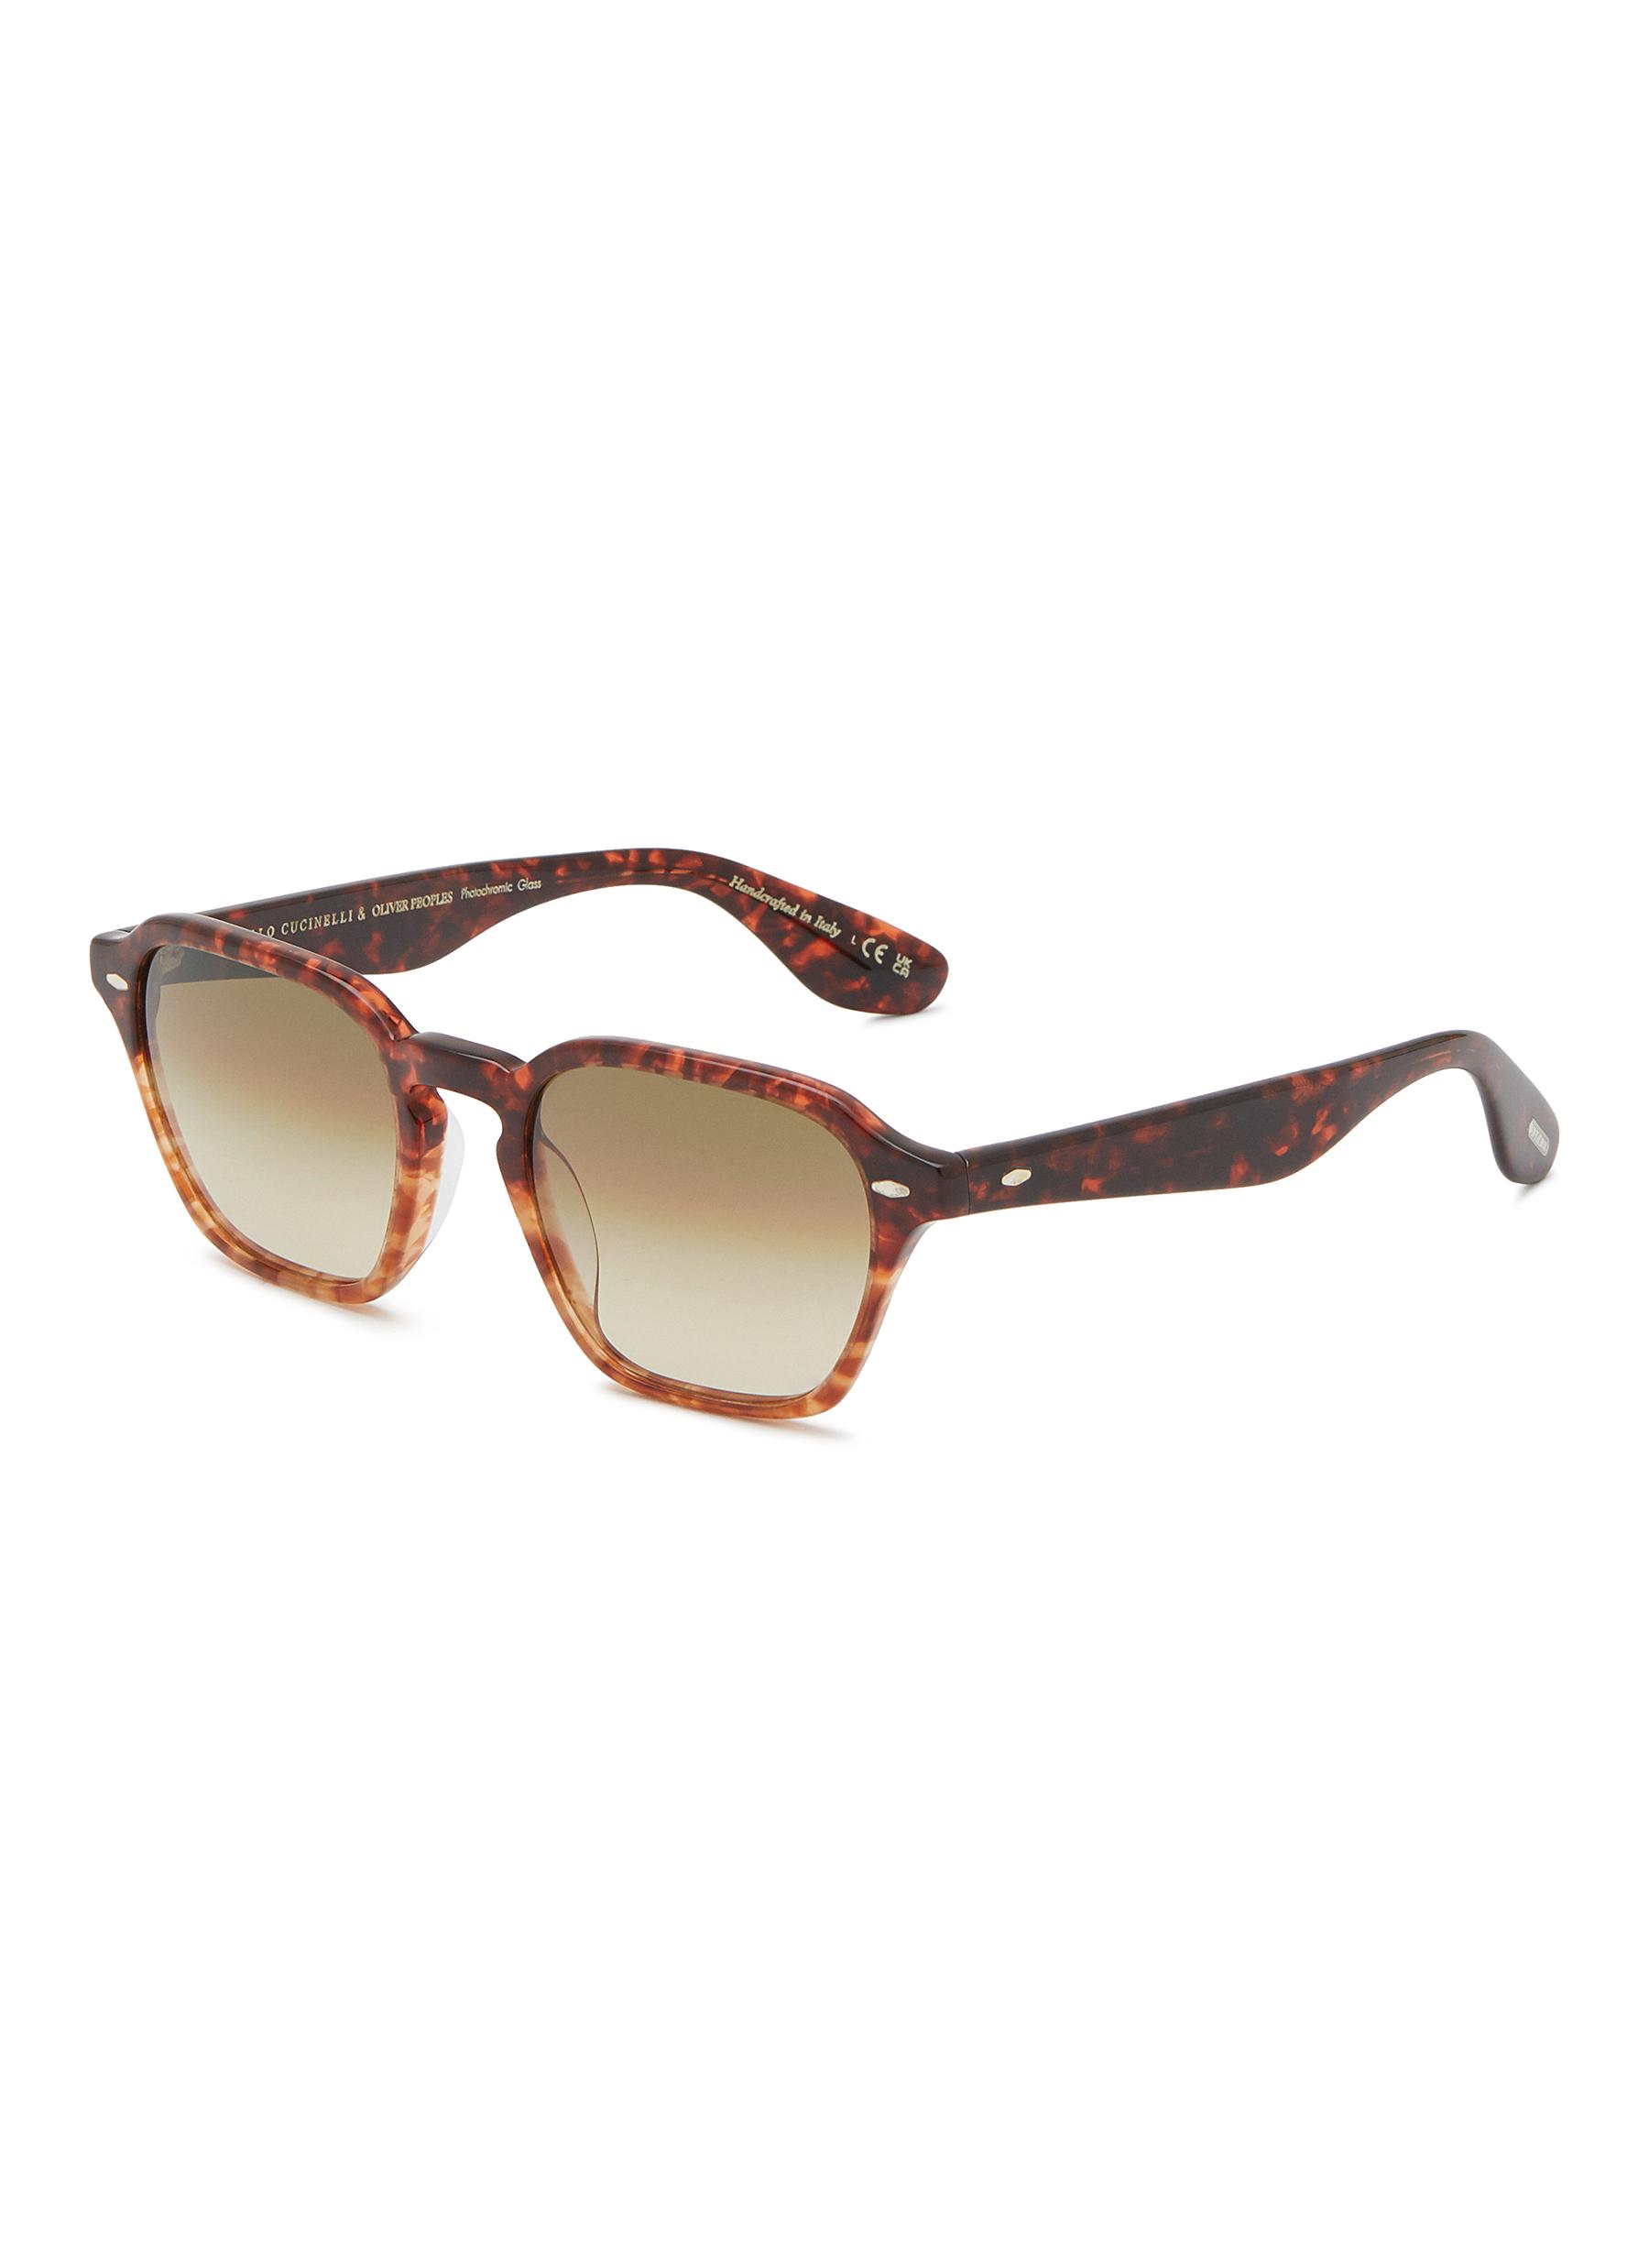 x Oliver Peoples Acetate Pillow Sunglasses